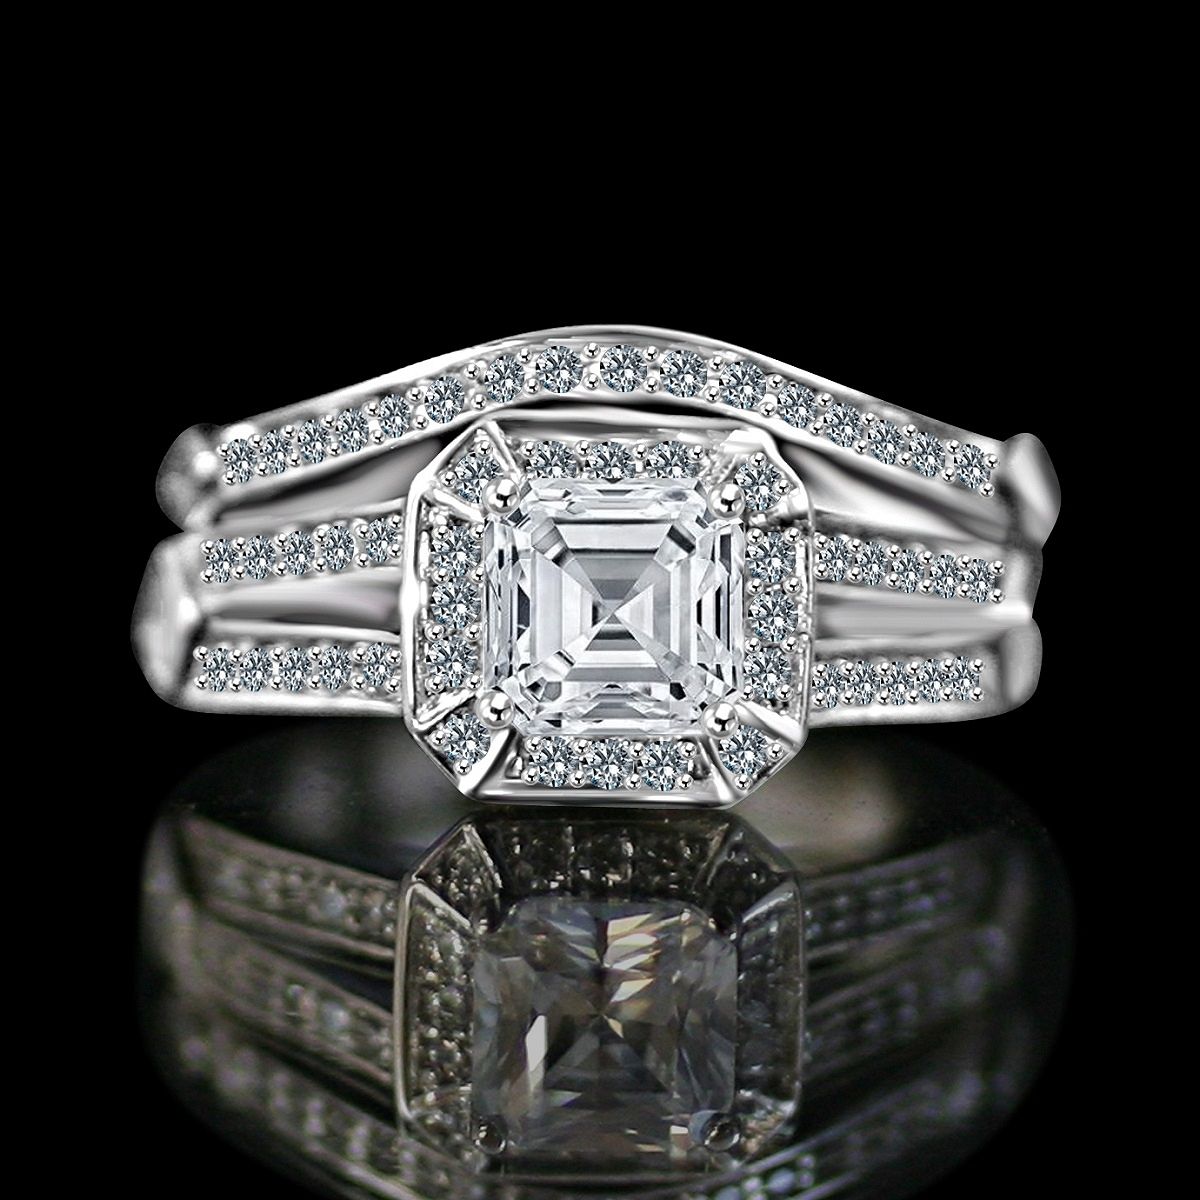 1 CT itensely Radiant Diamond Veneer Cubic zirconia Wedding/Engagement set in Sterling Silver Ring. 635R71637